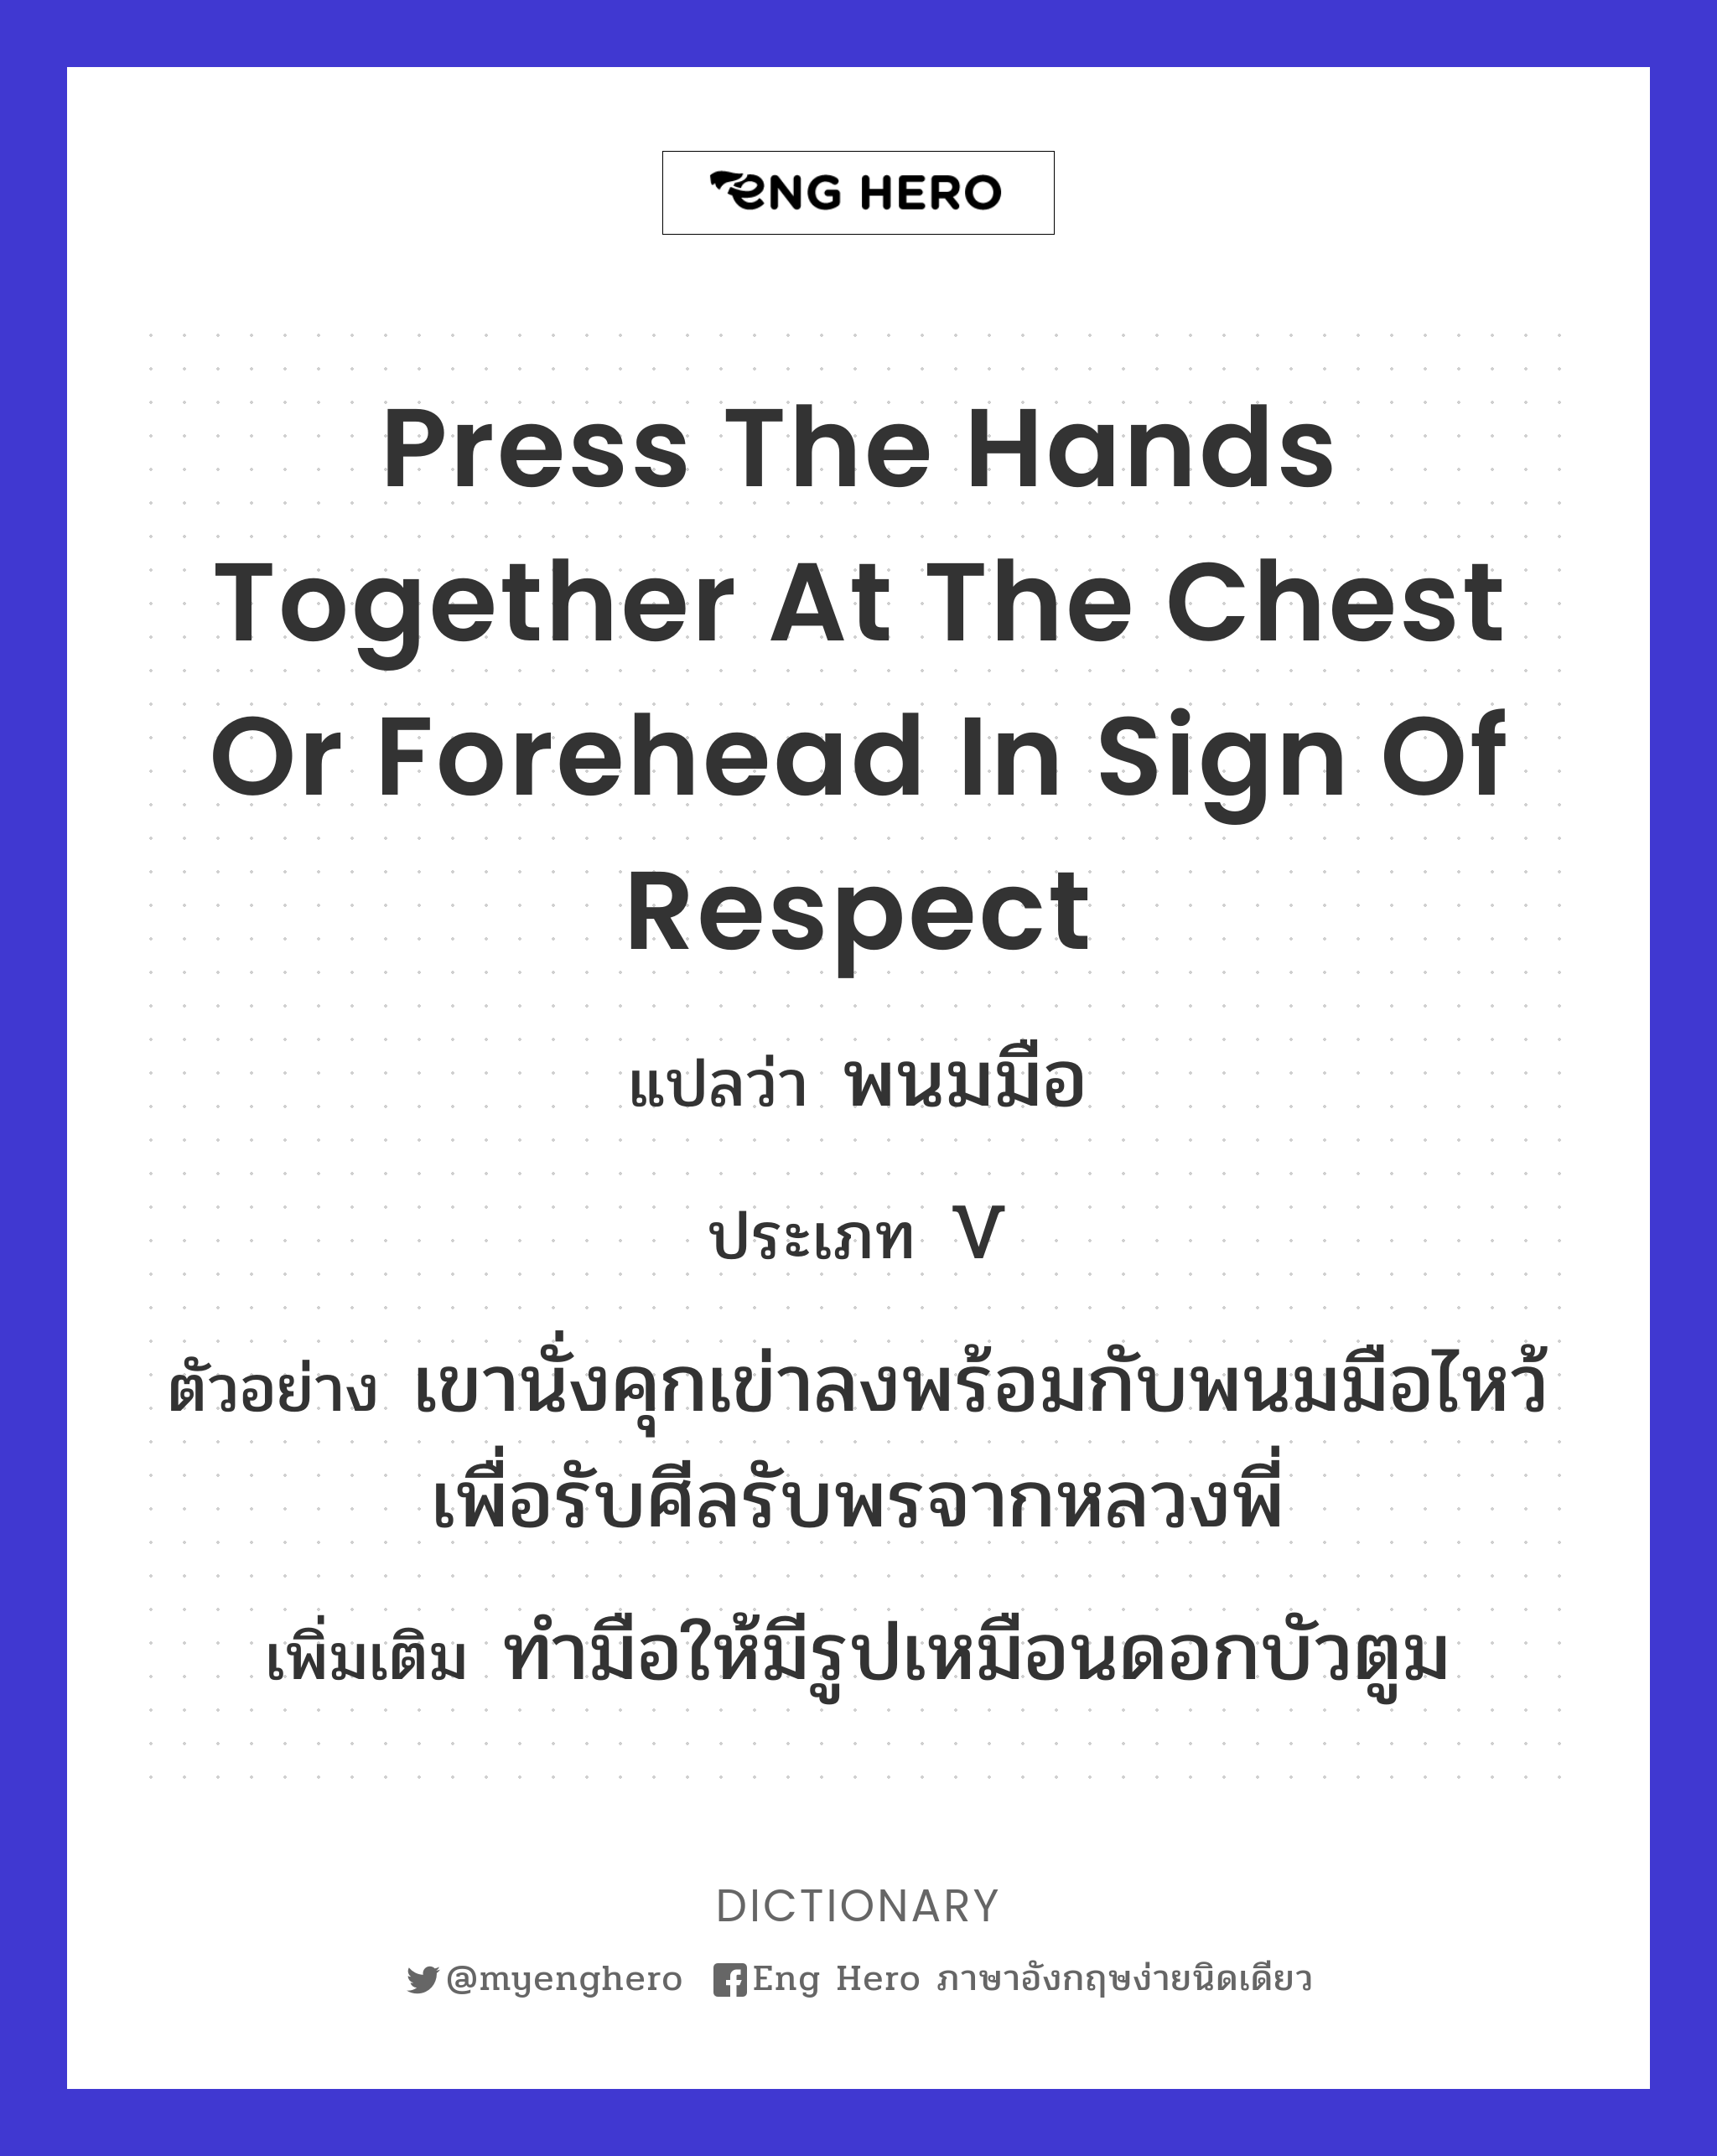 press the hands together at the chest or forehead in sign of respect